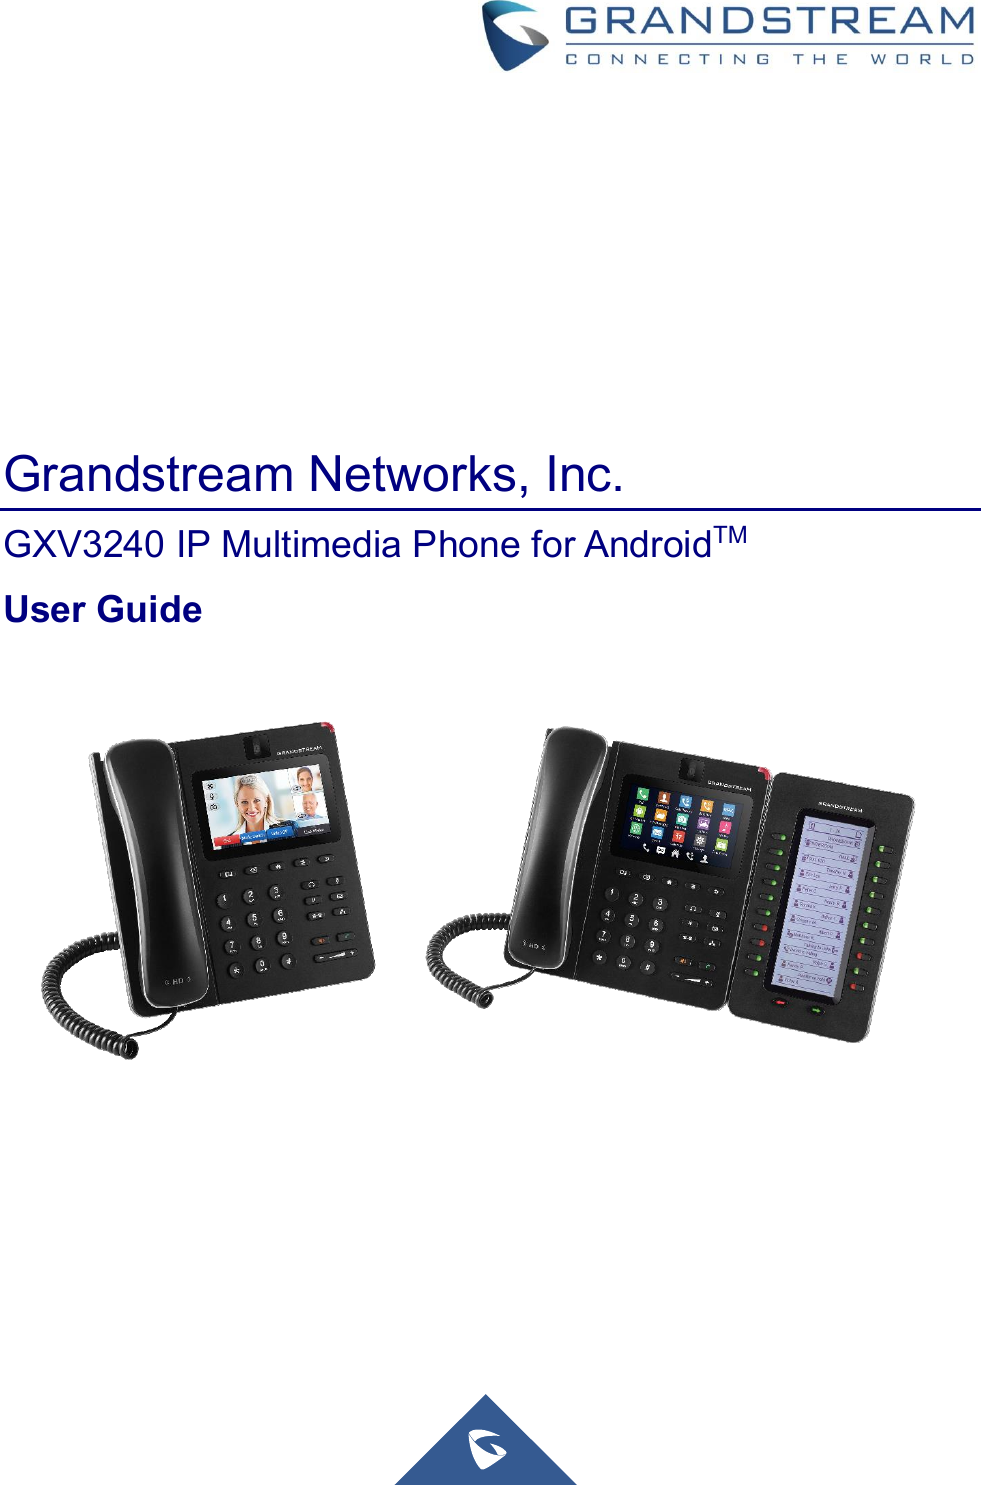                    Grandstream Networks, Inc. GXV3240 IP Multimedia Phone for AndroidTM User Guide  